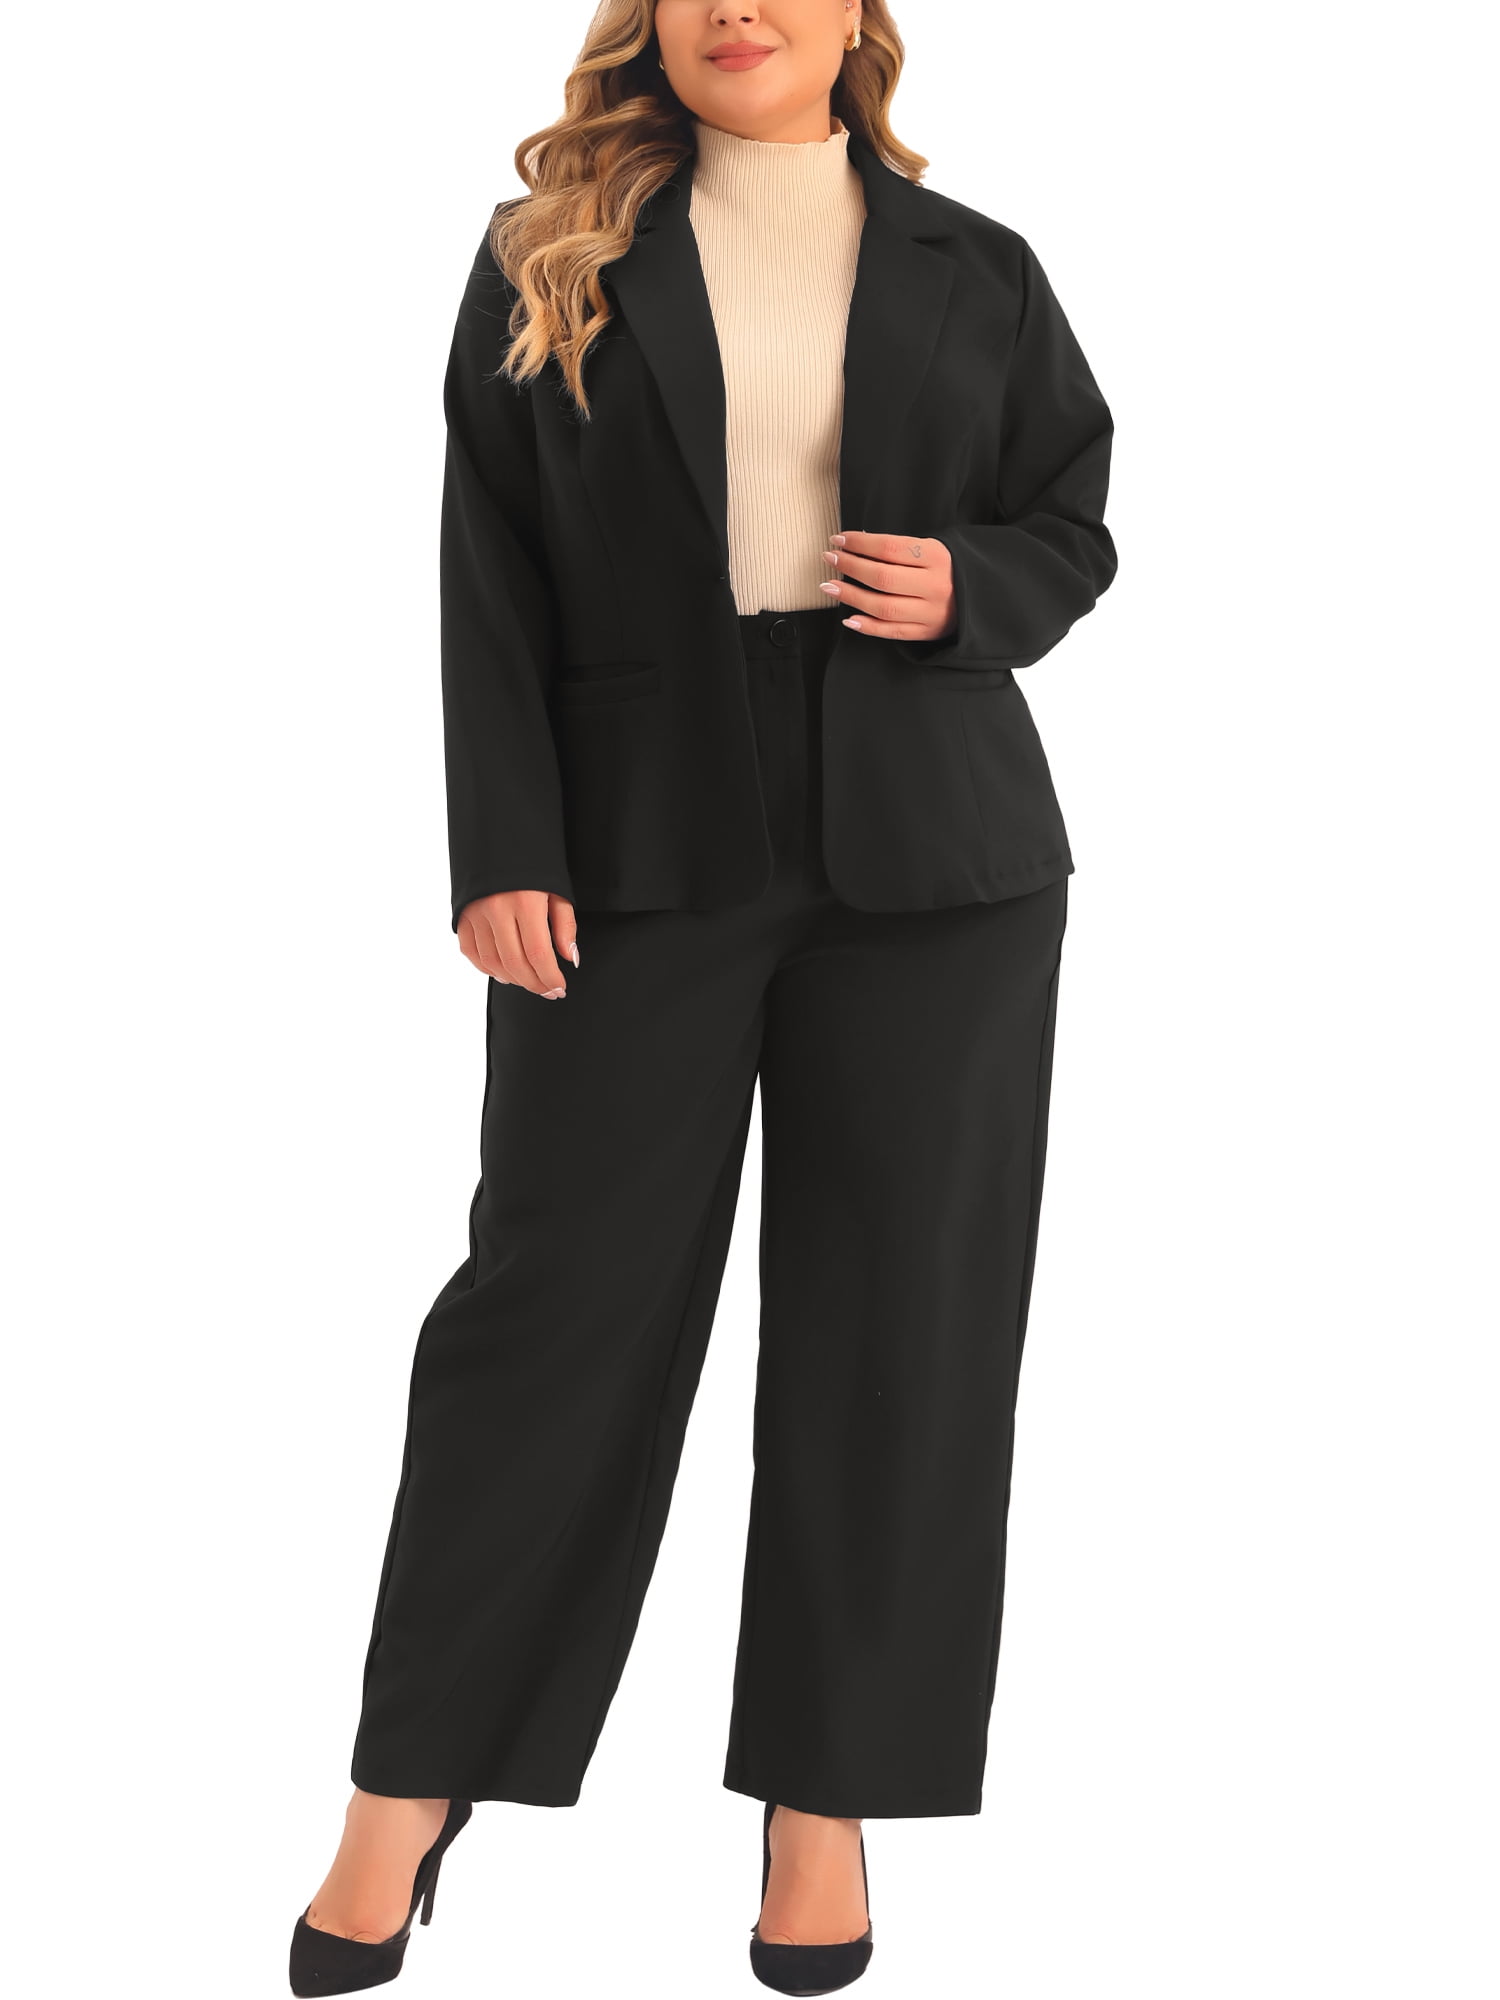 Agnes Orinda Plus Size Suit Two Piece Outfits for Women Business Office ...